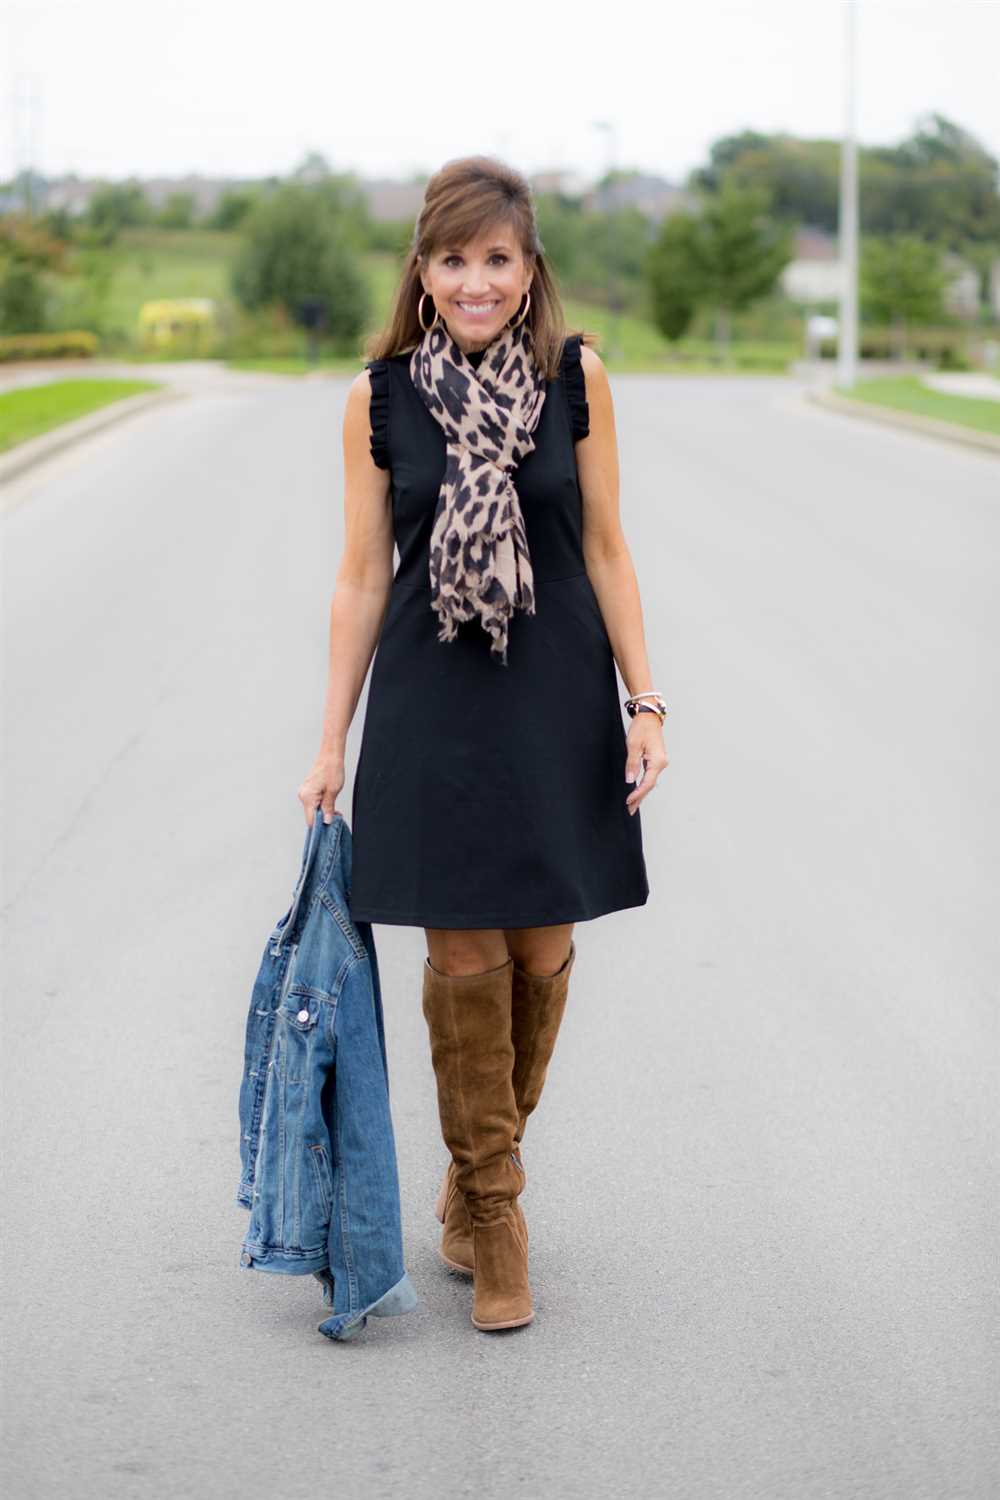 How to wear a scarf with a sleeveless dress